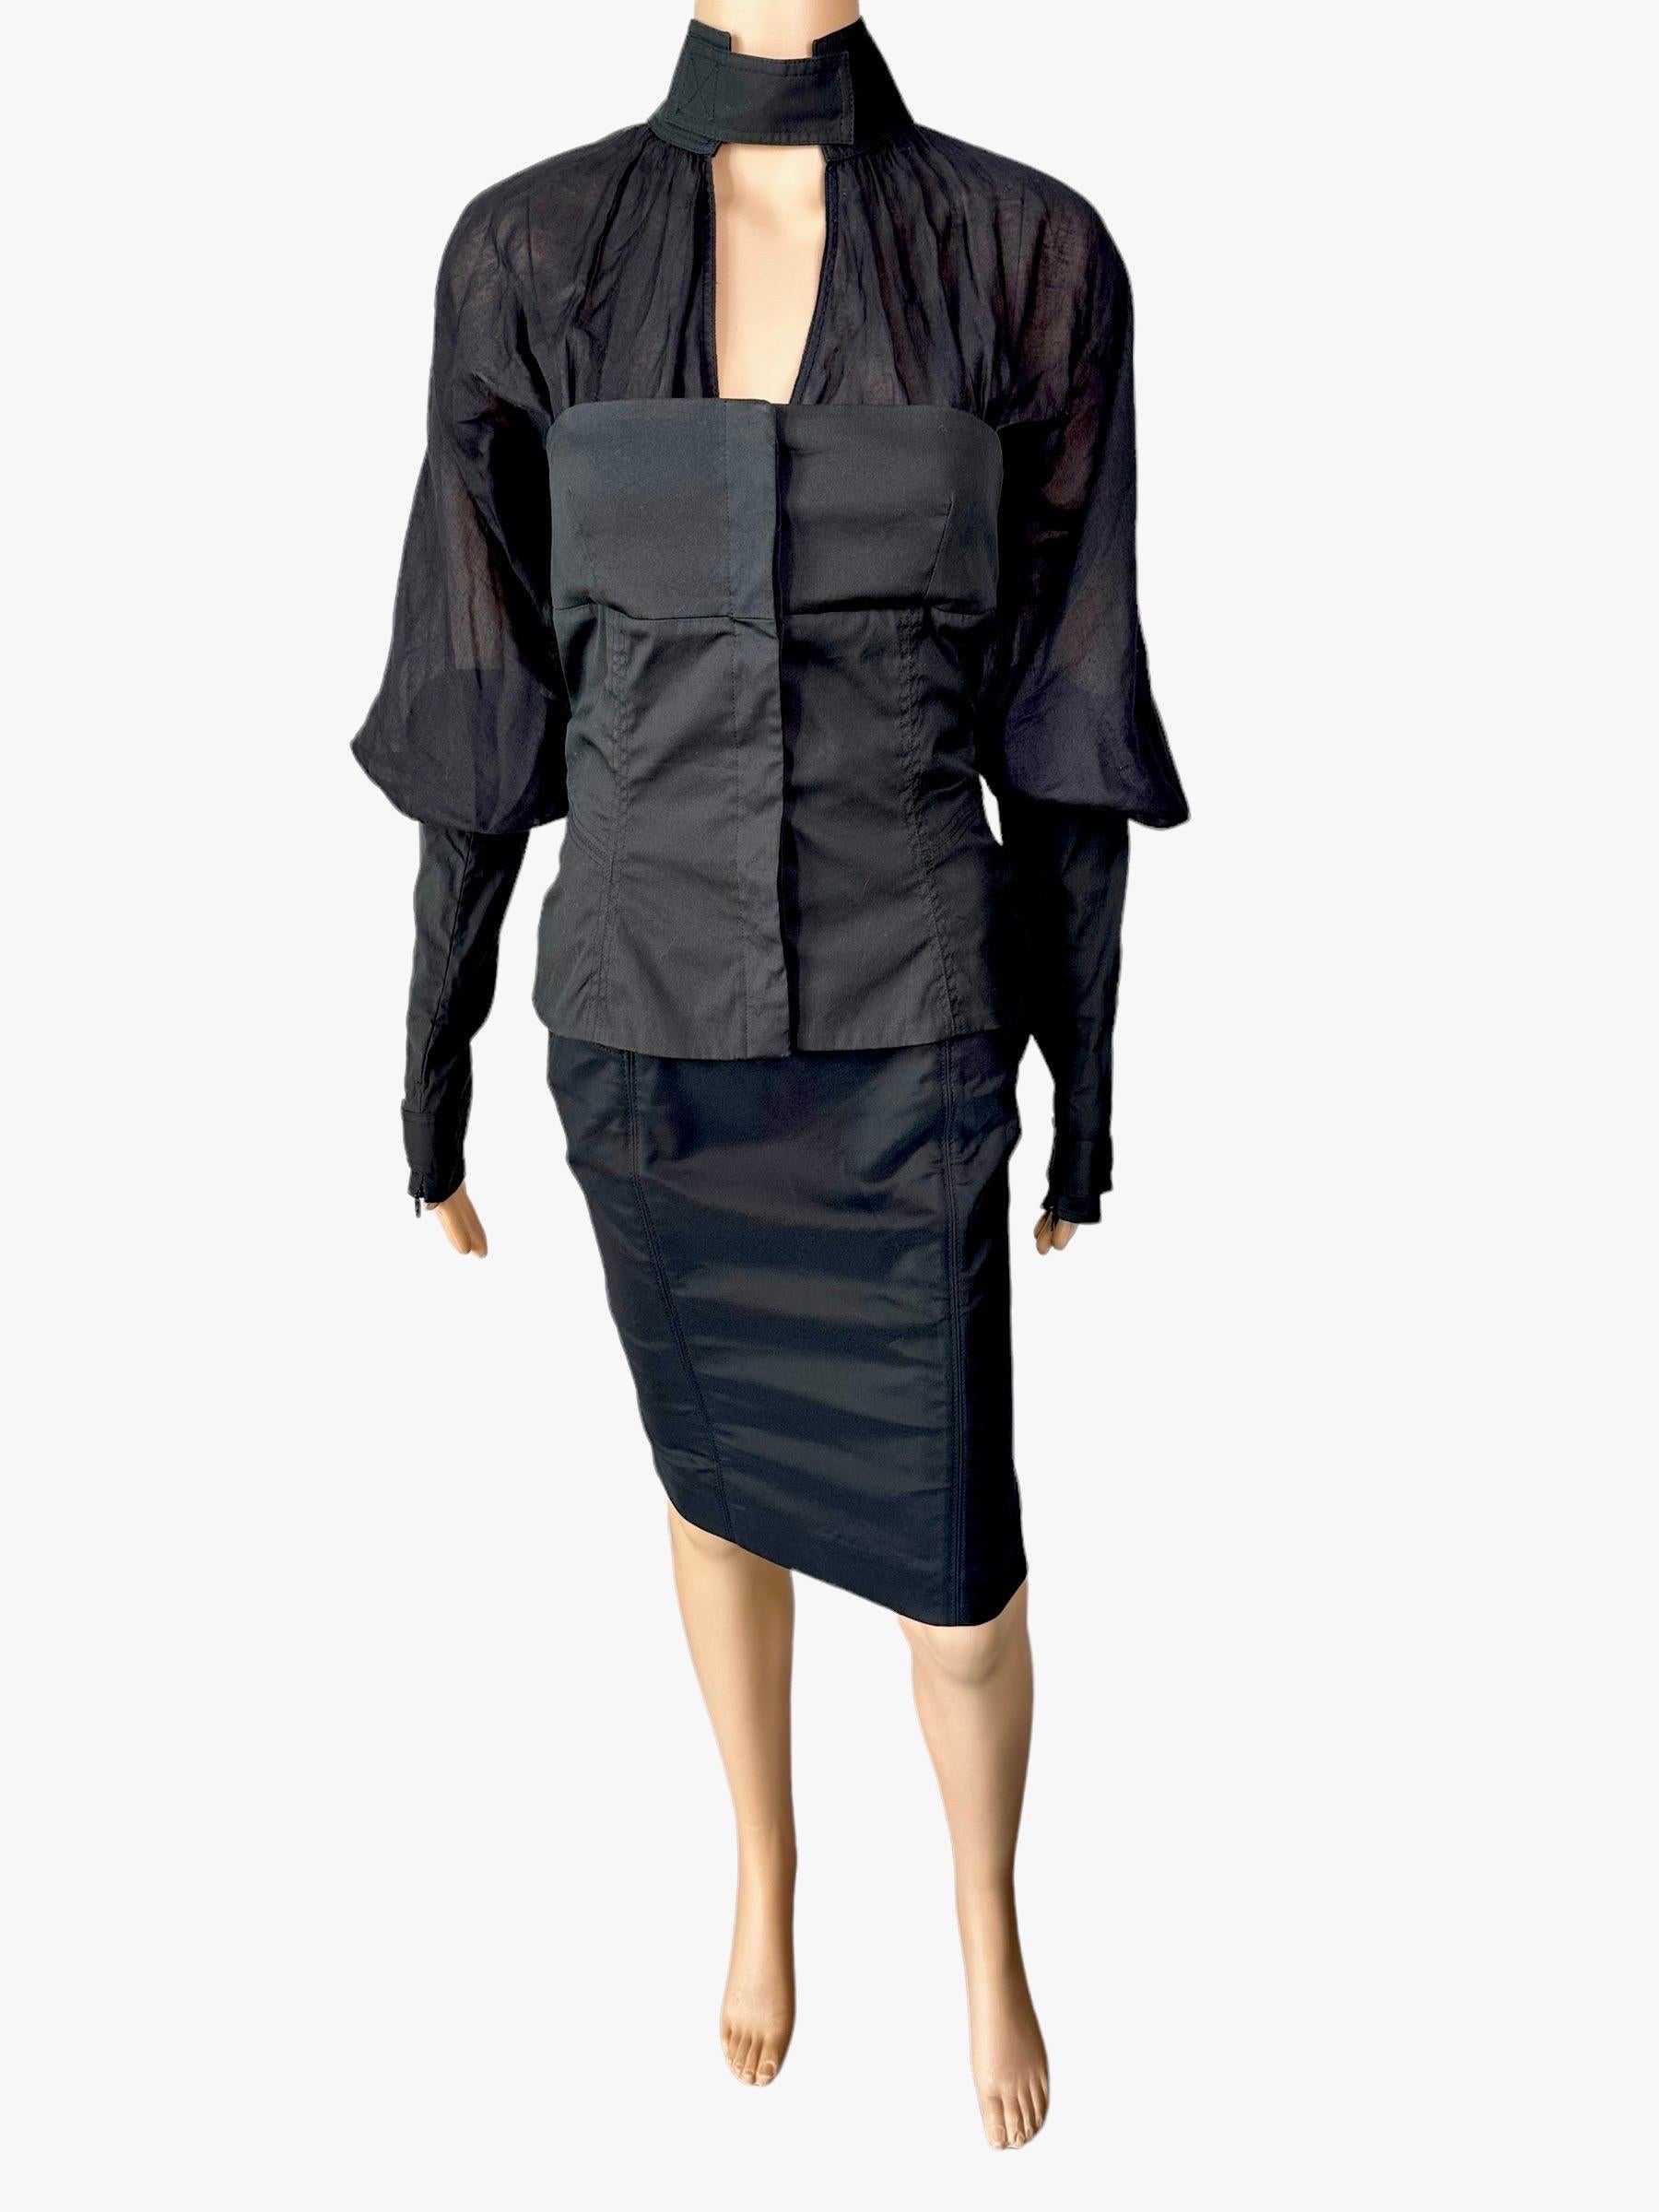 Tom Ford for Gucci F/W 2003 Jacket Top & Skirt Suit Black 2 Piece Set Ensemble For Sale 4